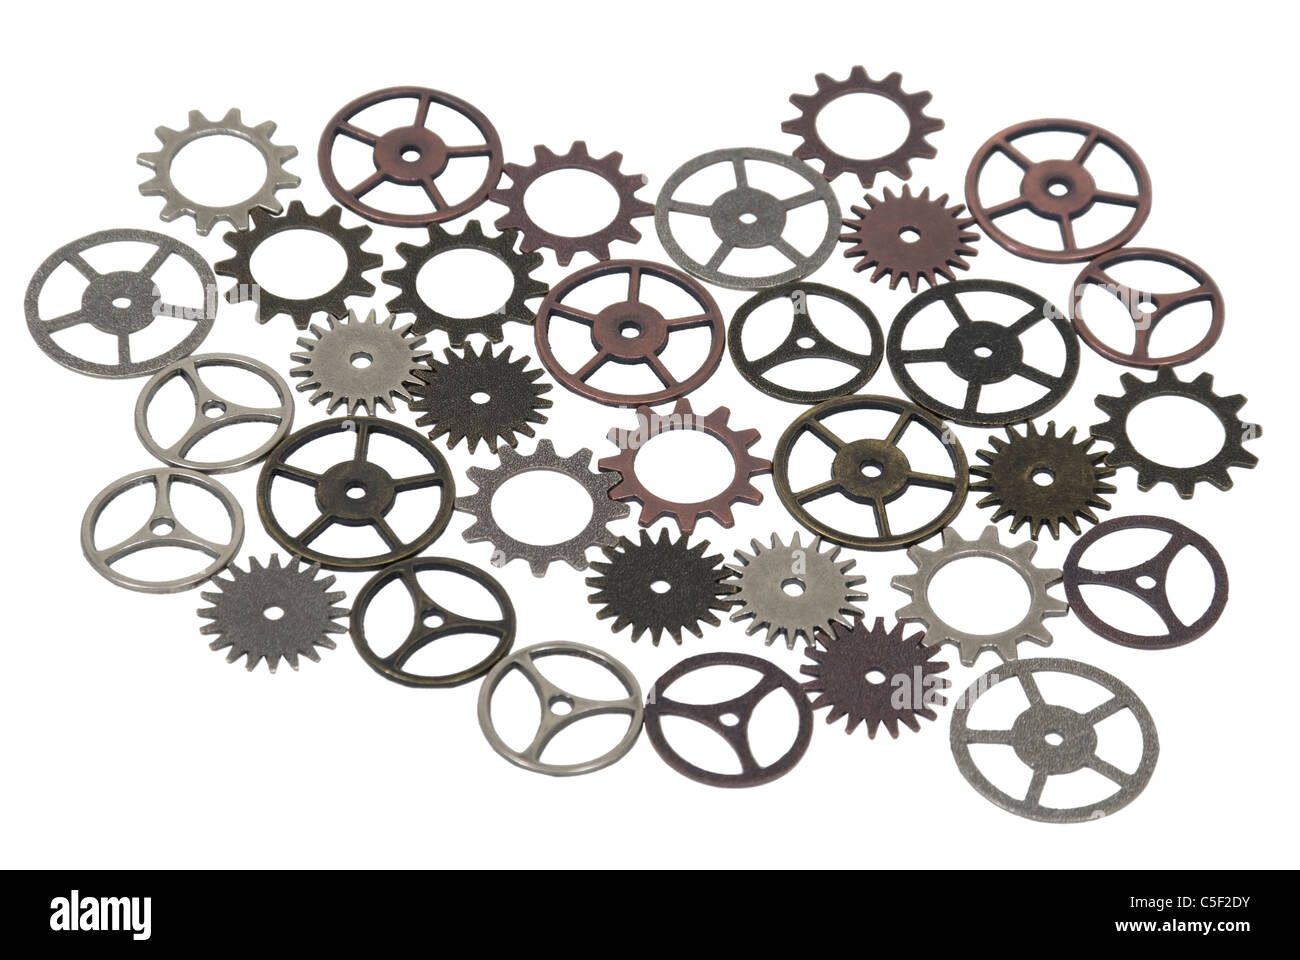 Various antique and retro gears with interlinking teeth and cogs - path included Stock Photo